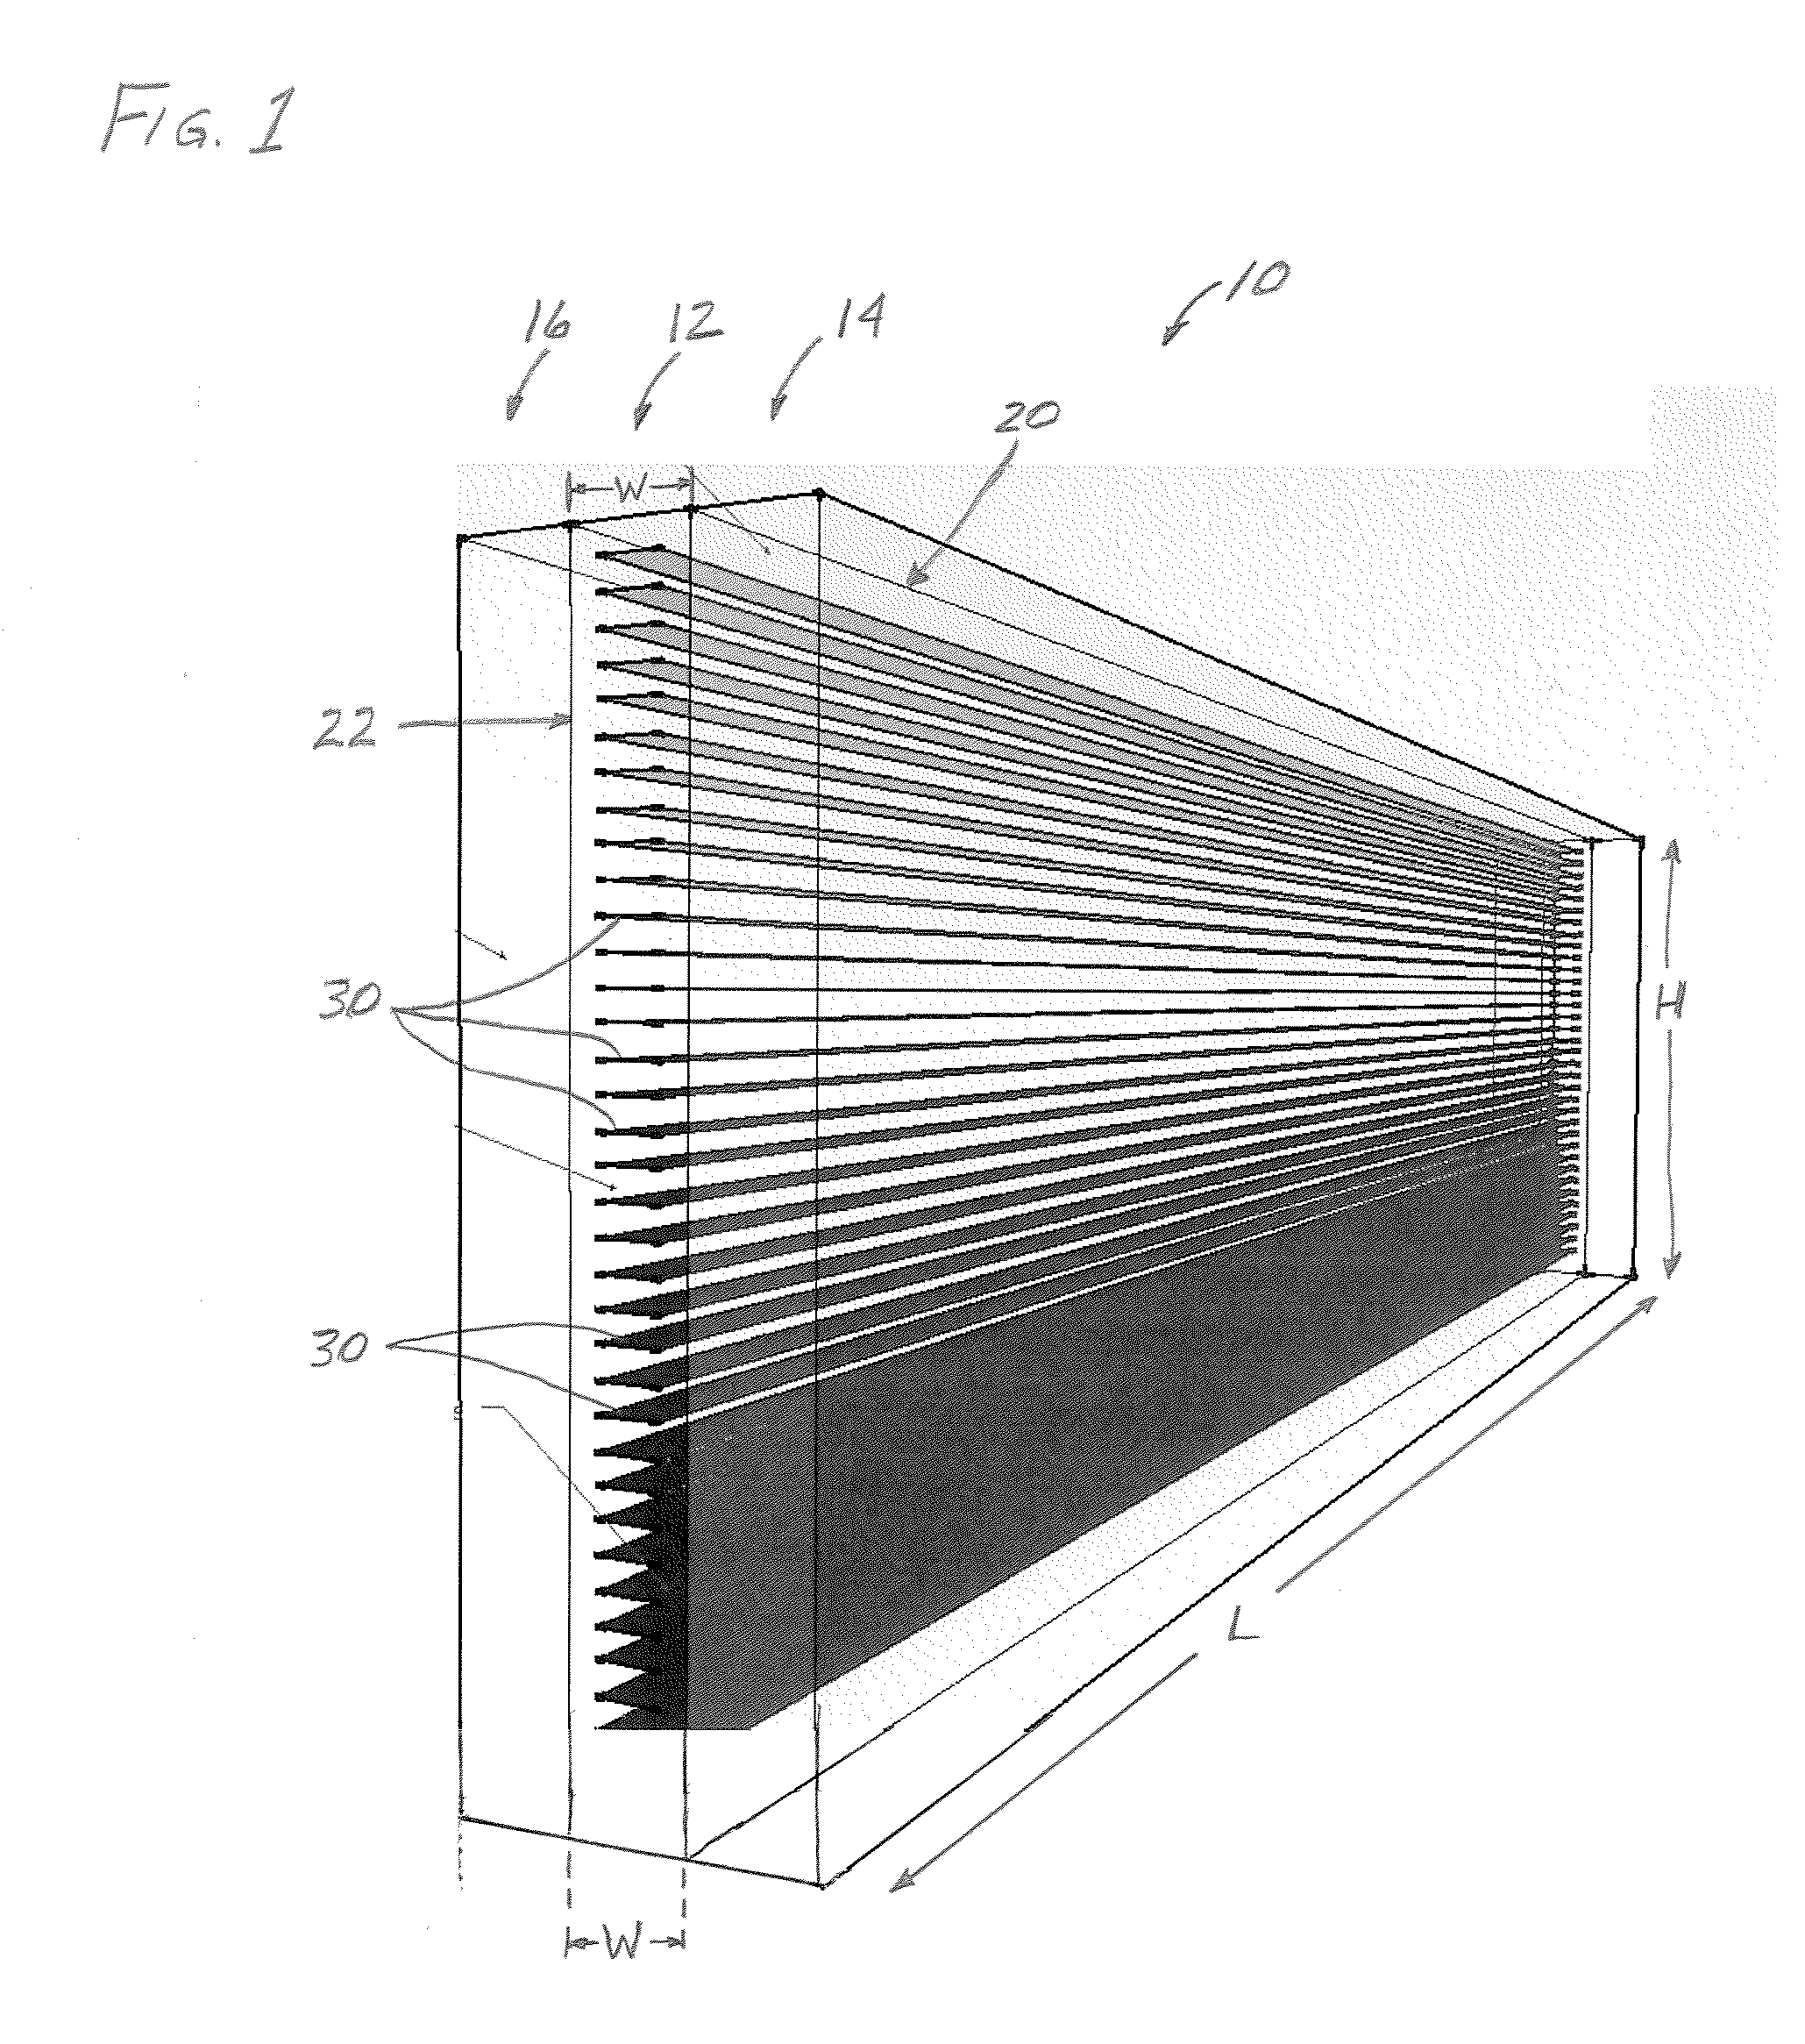 Apparatus and method for solar heat gain reduction in a window assembly